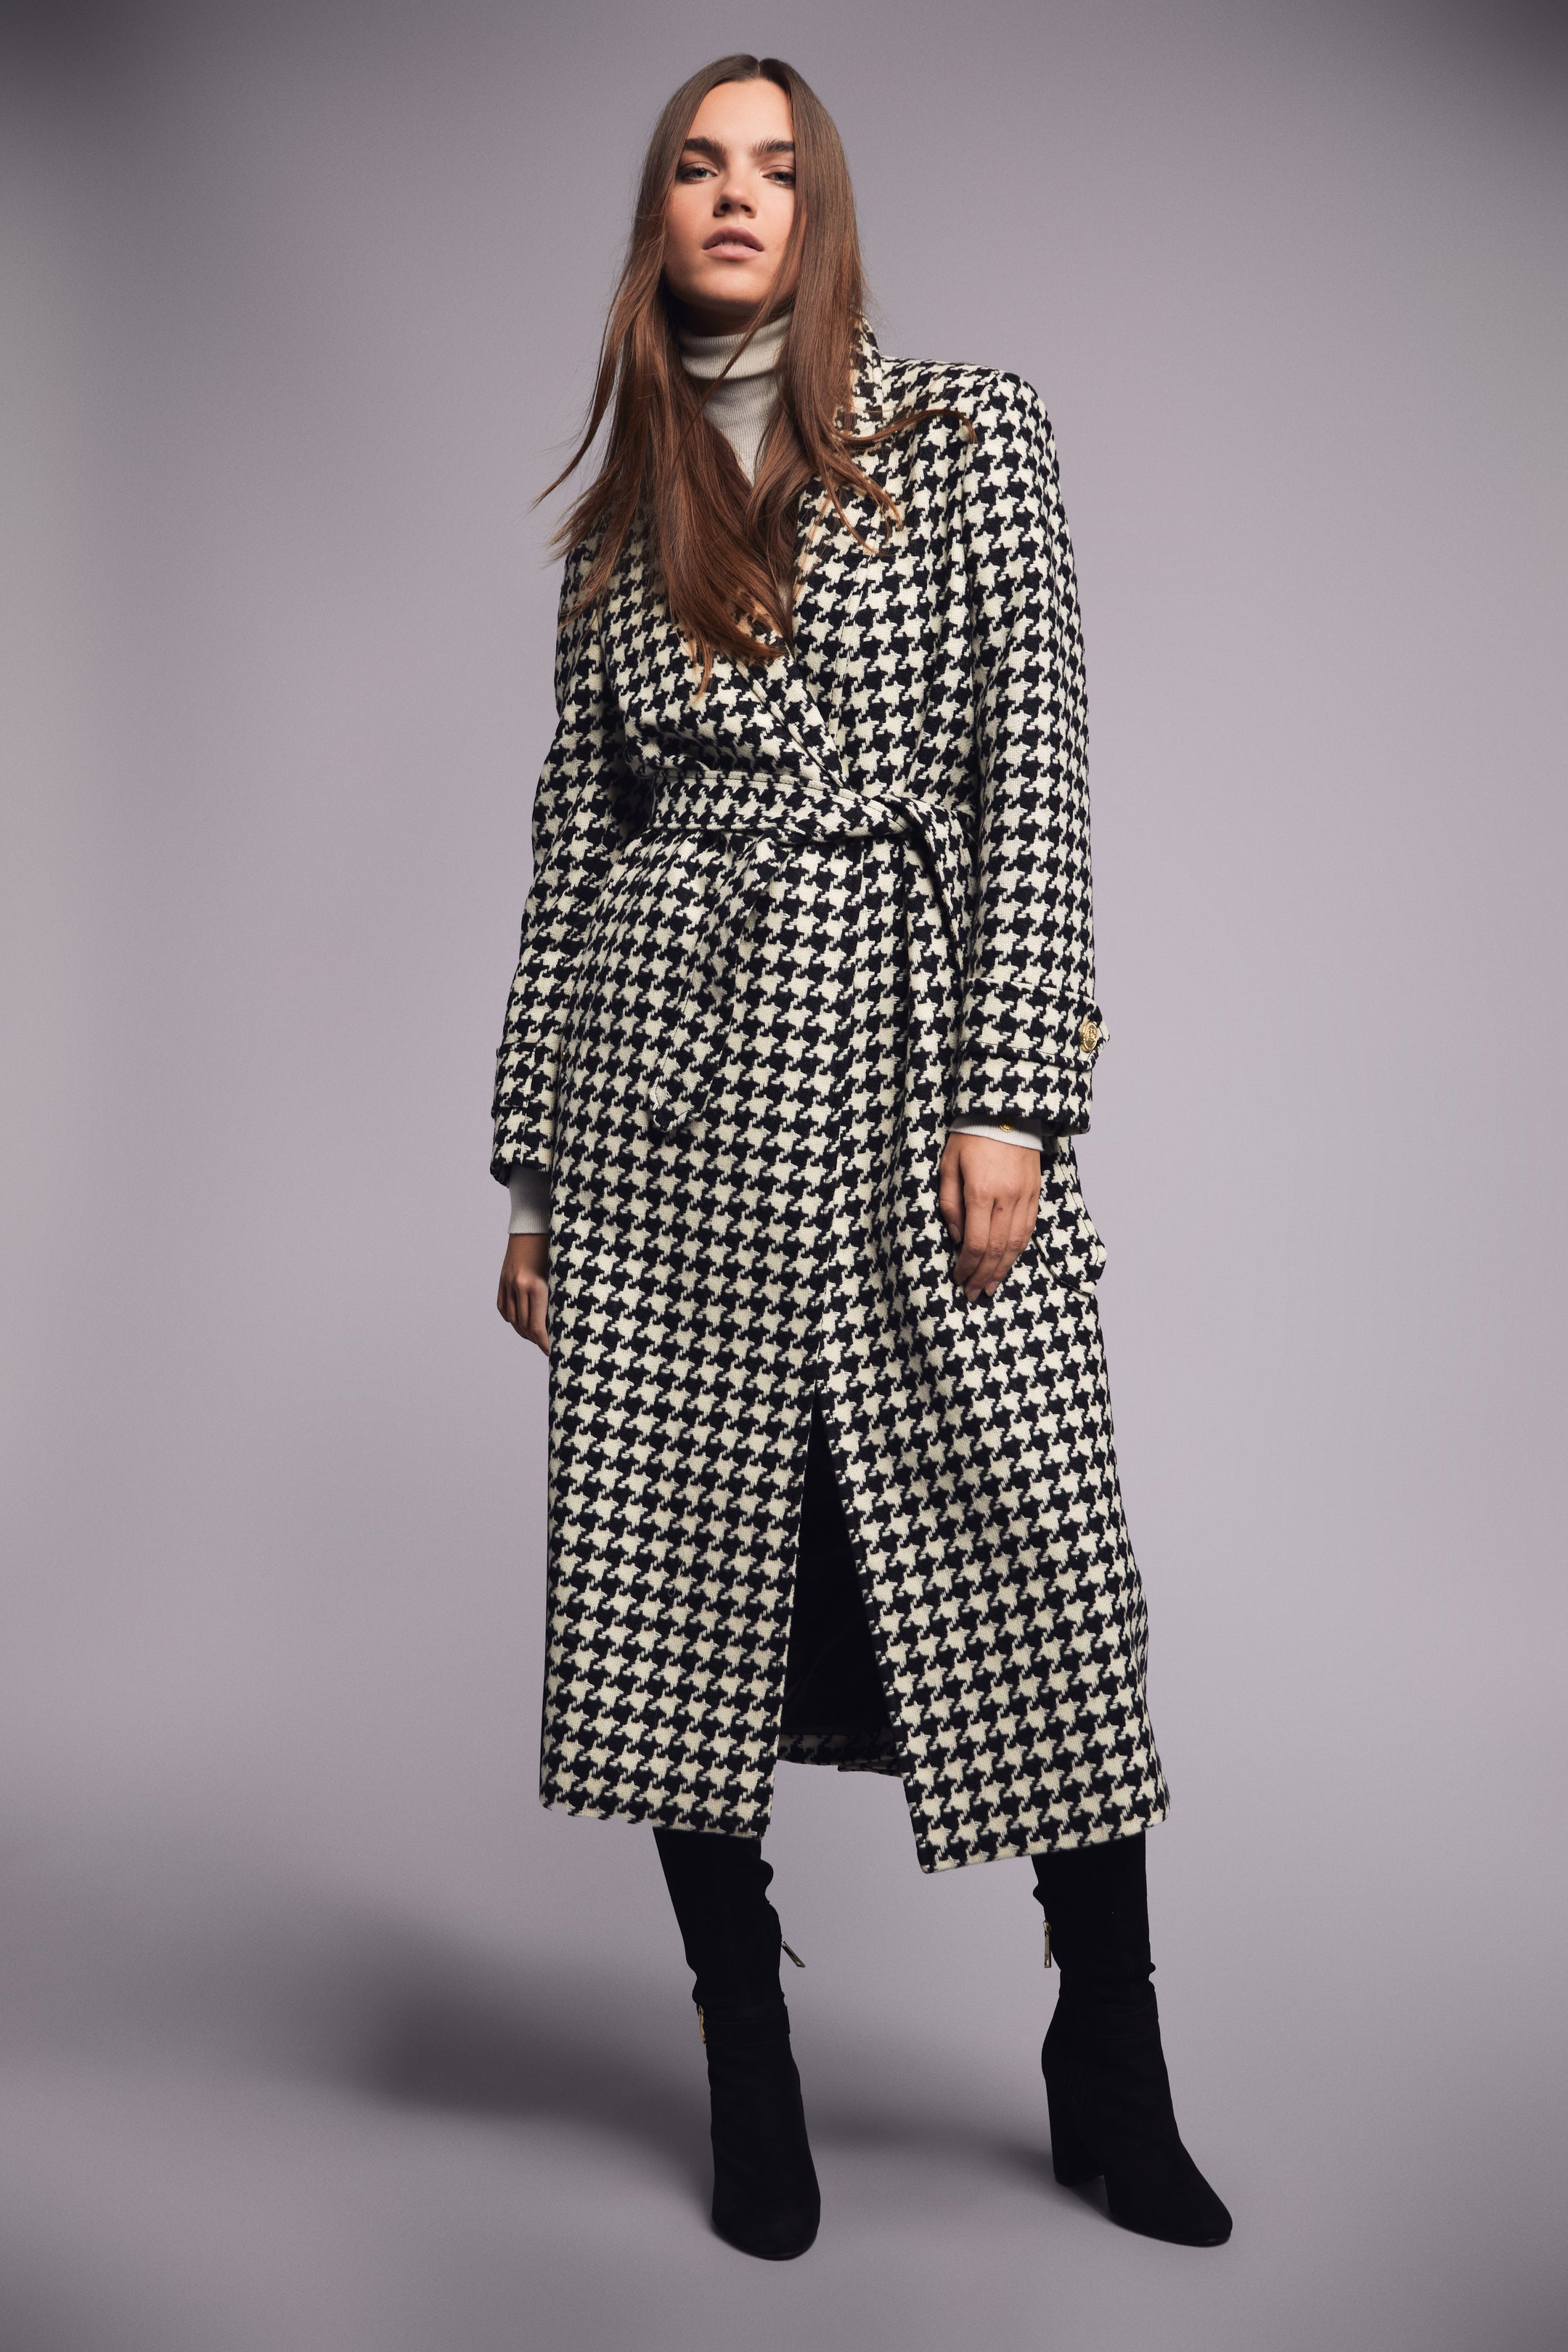 Wrap Coat (Large Scale Houndstooth) – Holland Cooper